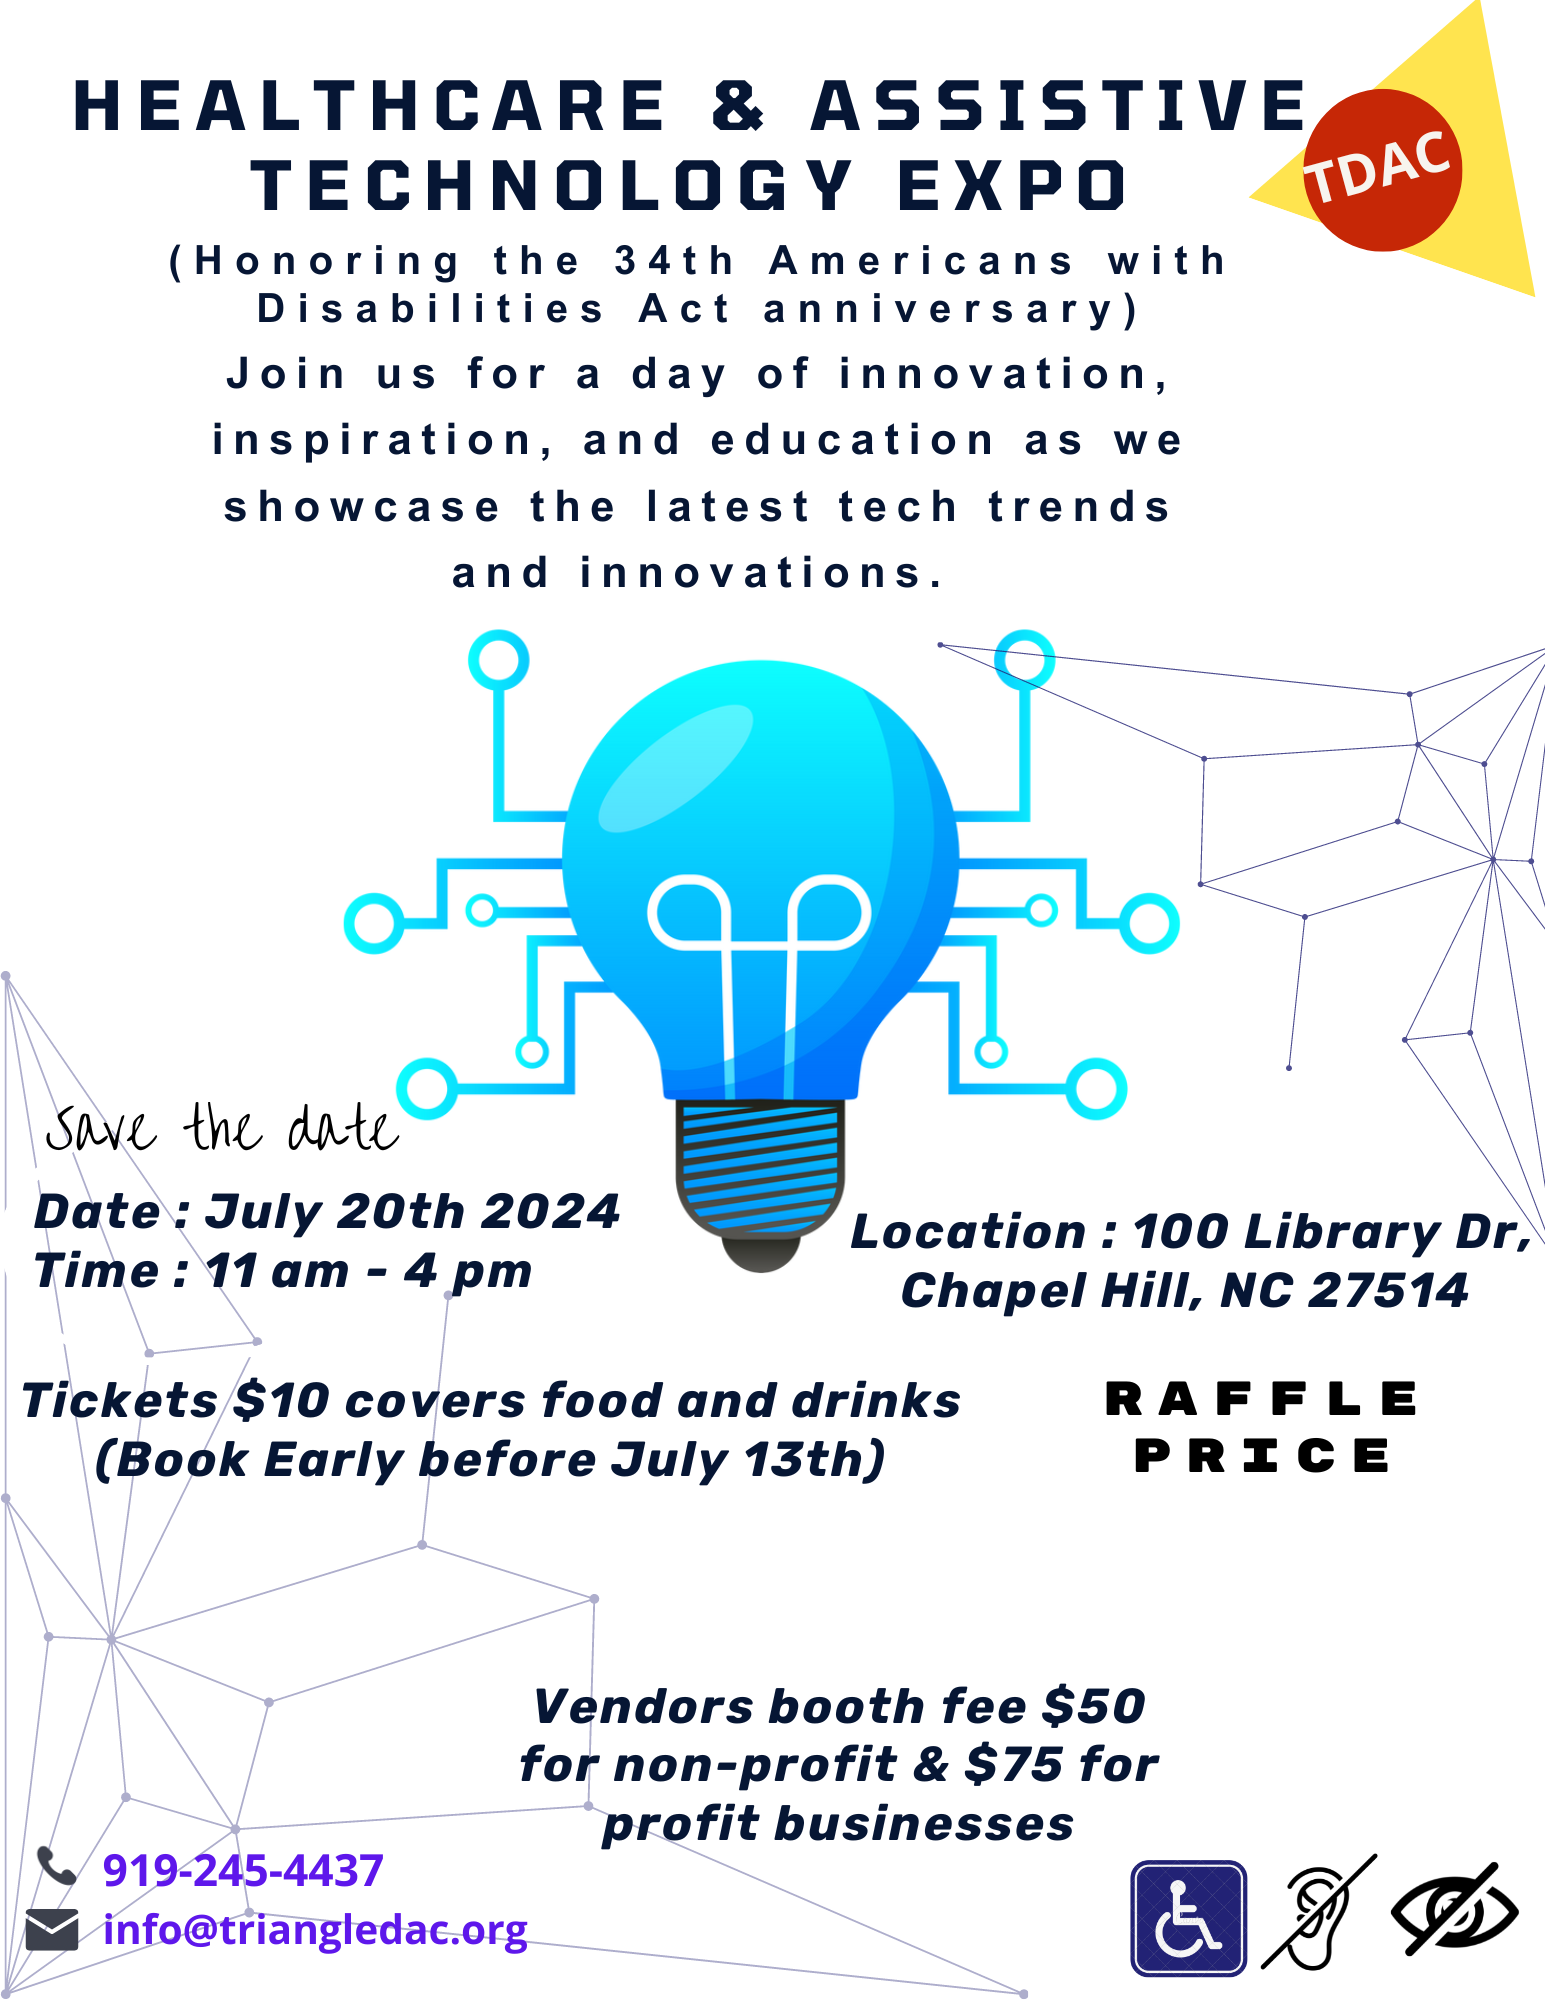 HEALTHCARE & ASSISTIVE TECHNIQUES FAIR
(Honoring 34th American with Disabilities Act)
Join us for a day of innovation, inspiration, and education as we showcase the latest tech trends and innovations.
Date : July 20th 2024 Time : 11am-4:00 PM
Location @ 100, Library Drive, Chapel Hill, NC 27514.

Vendors - Vander Pharmacy, Script Talk, Abbott Libre